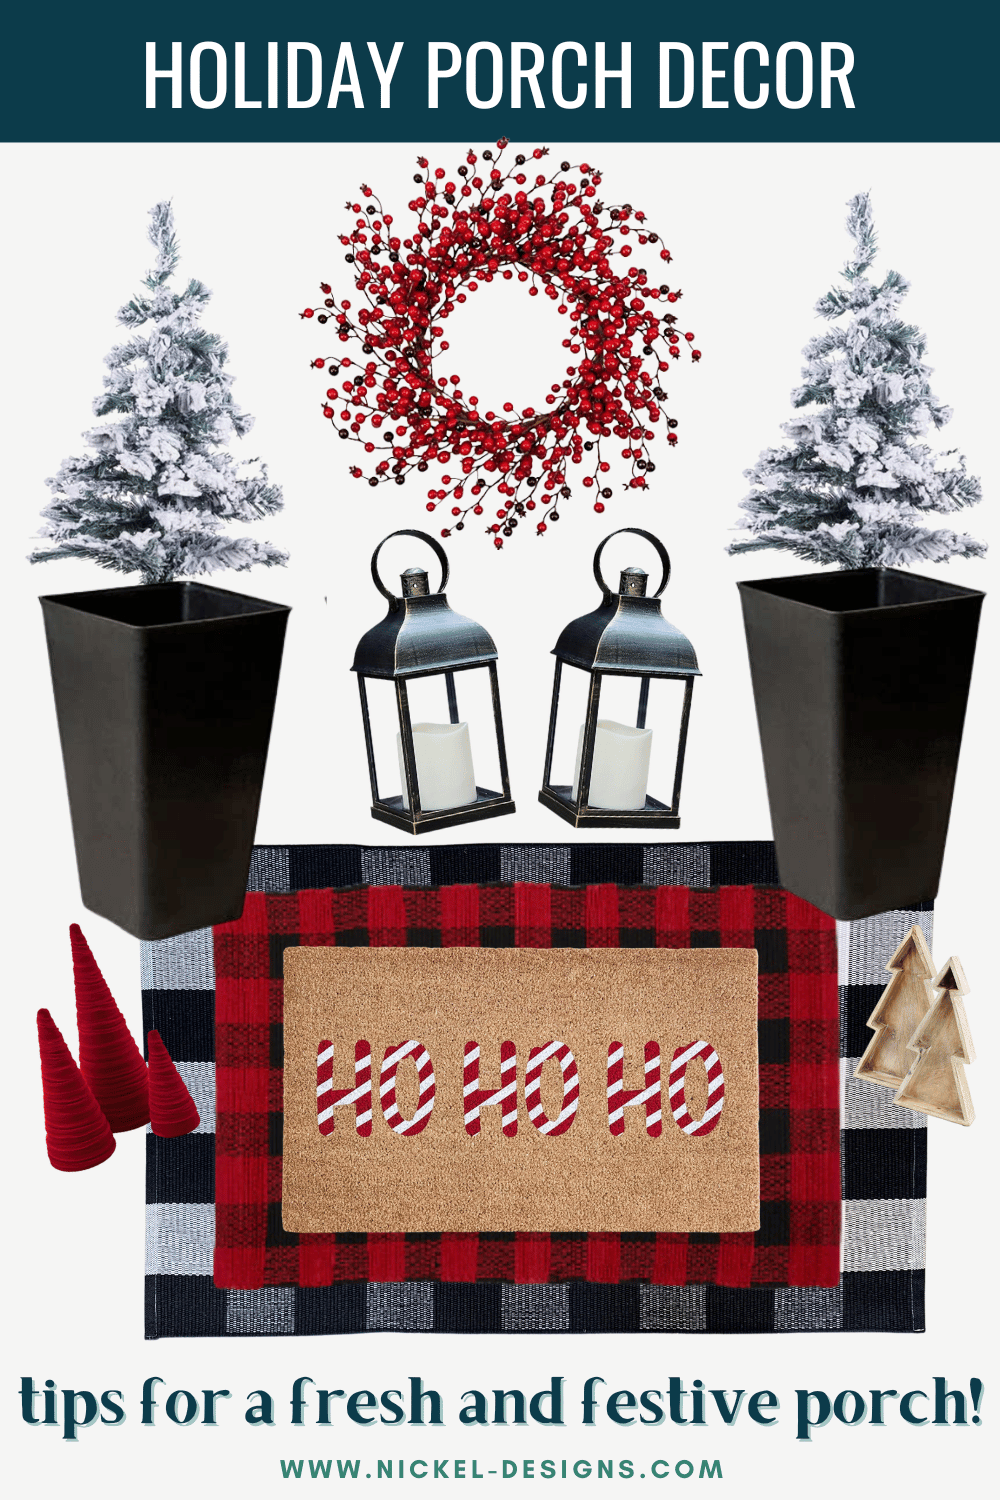 Welcoming the Holidays: Transform Your Front Porch with Nickel Designs and a bit of Festive Flair